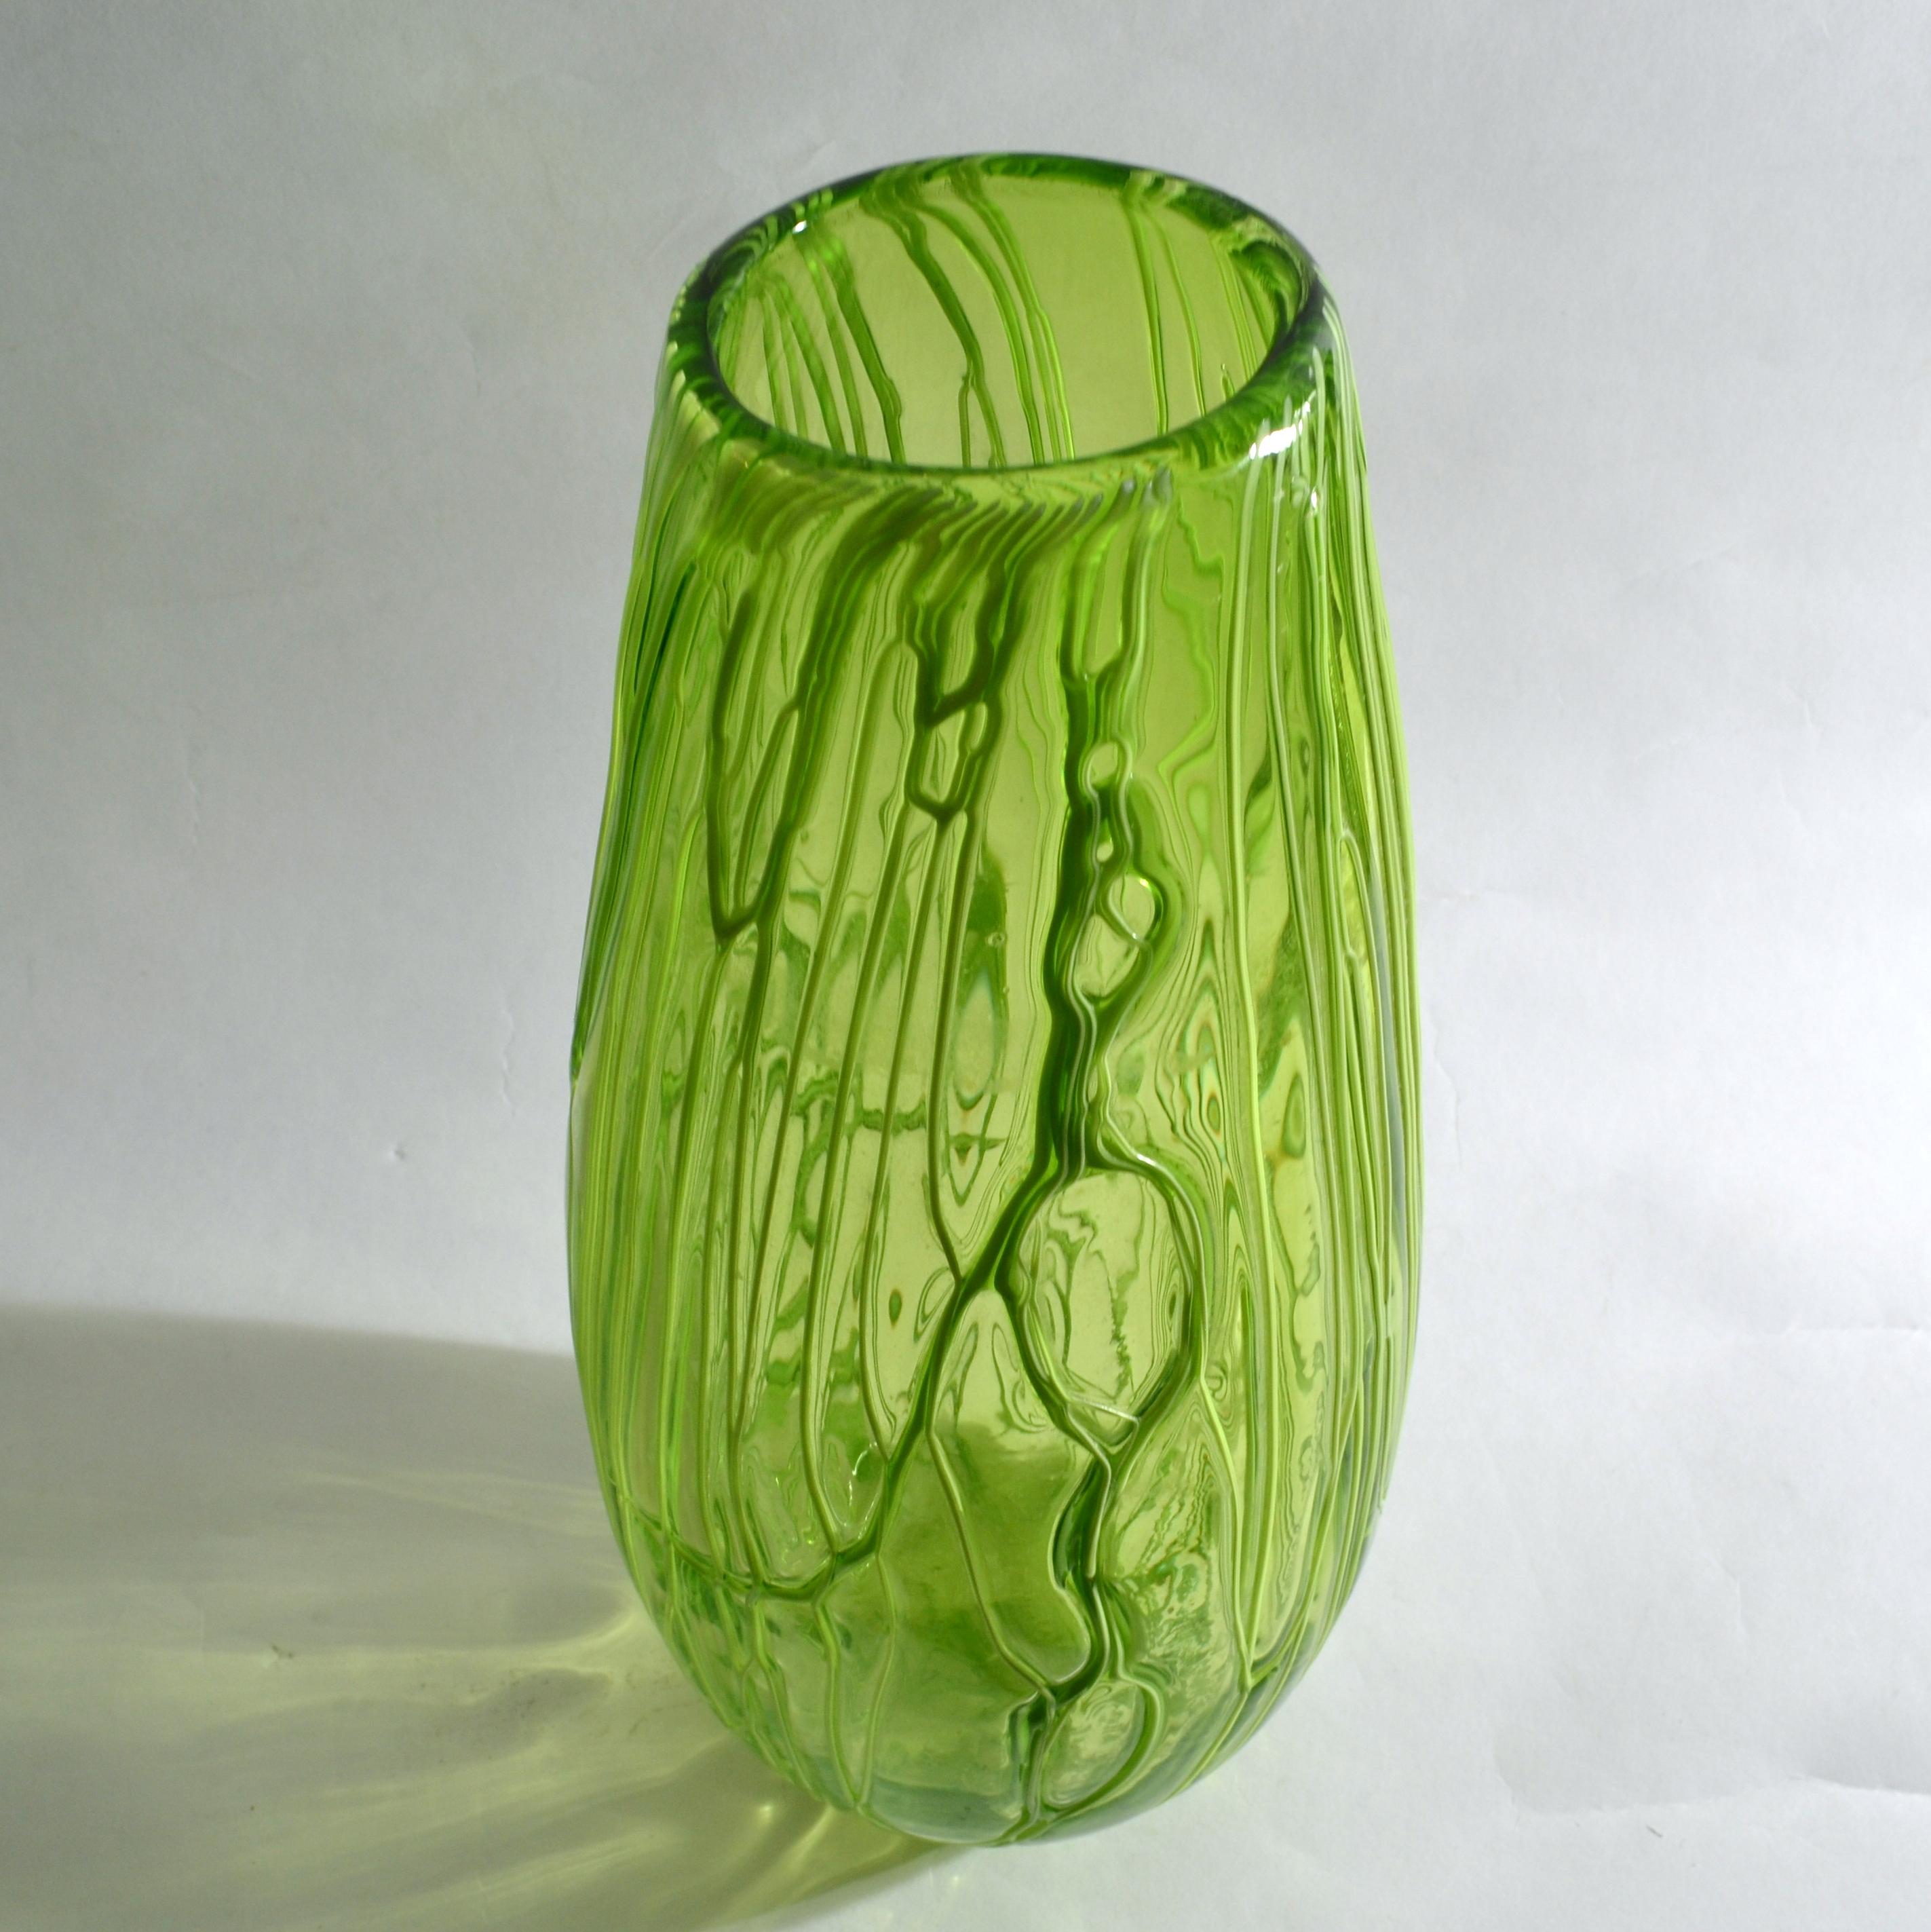 Pair of Hand Blown Glass Acid Green Veined Vases For Sale 5